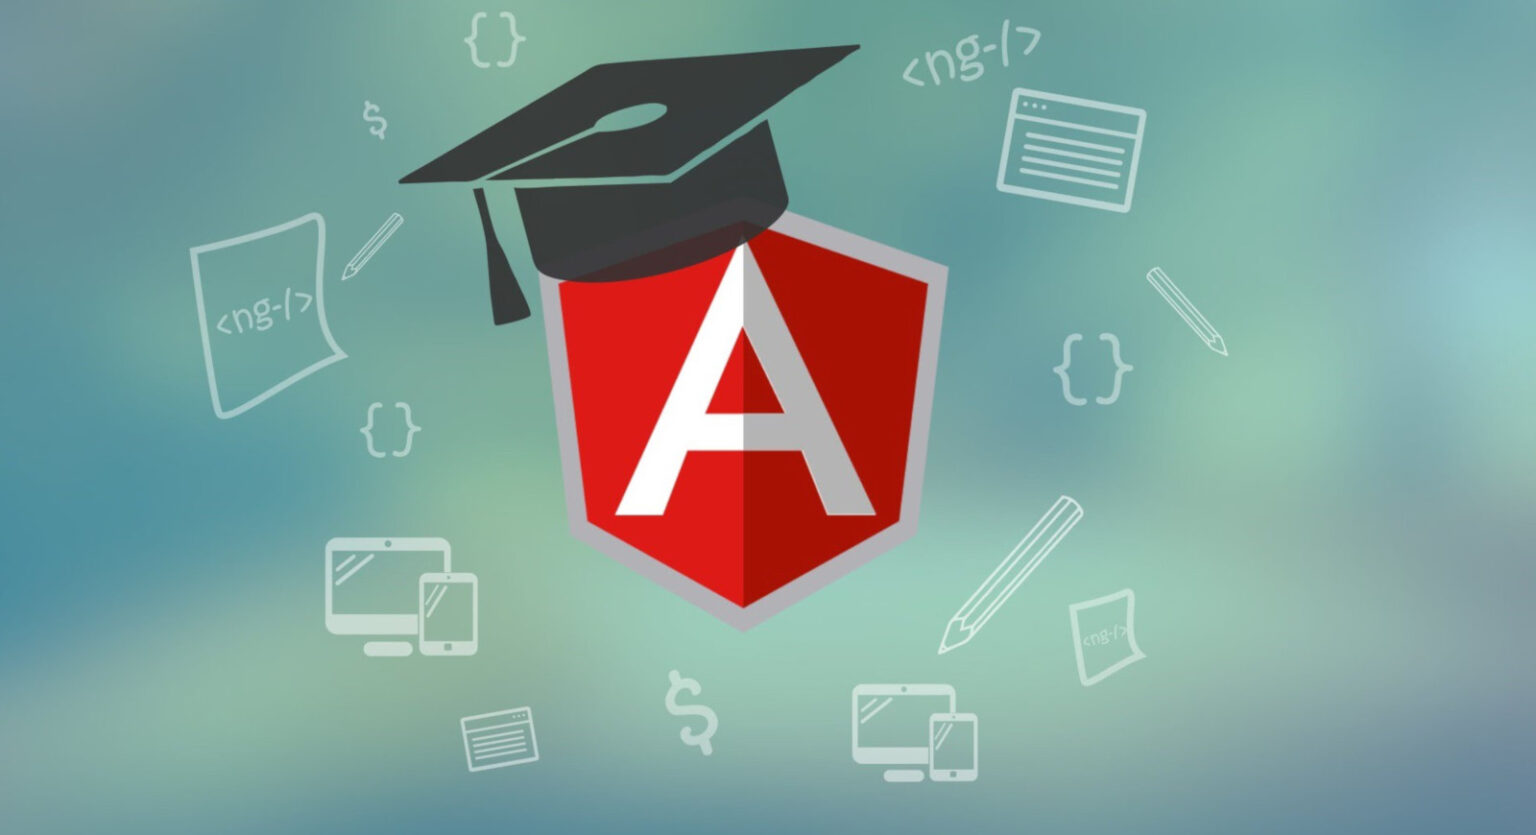 Angular is the new up-and-coming coding language everyone's learning. See why angular is the way of the future and why you should check it out.